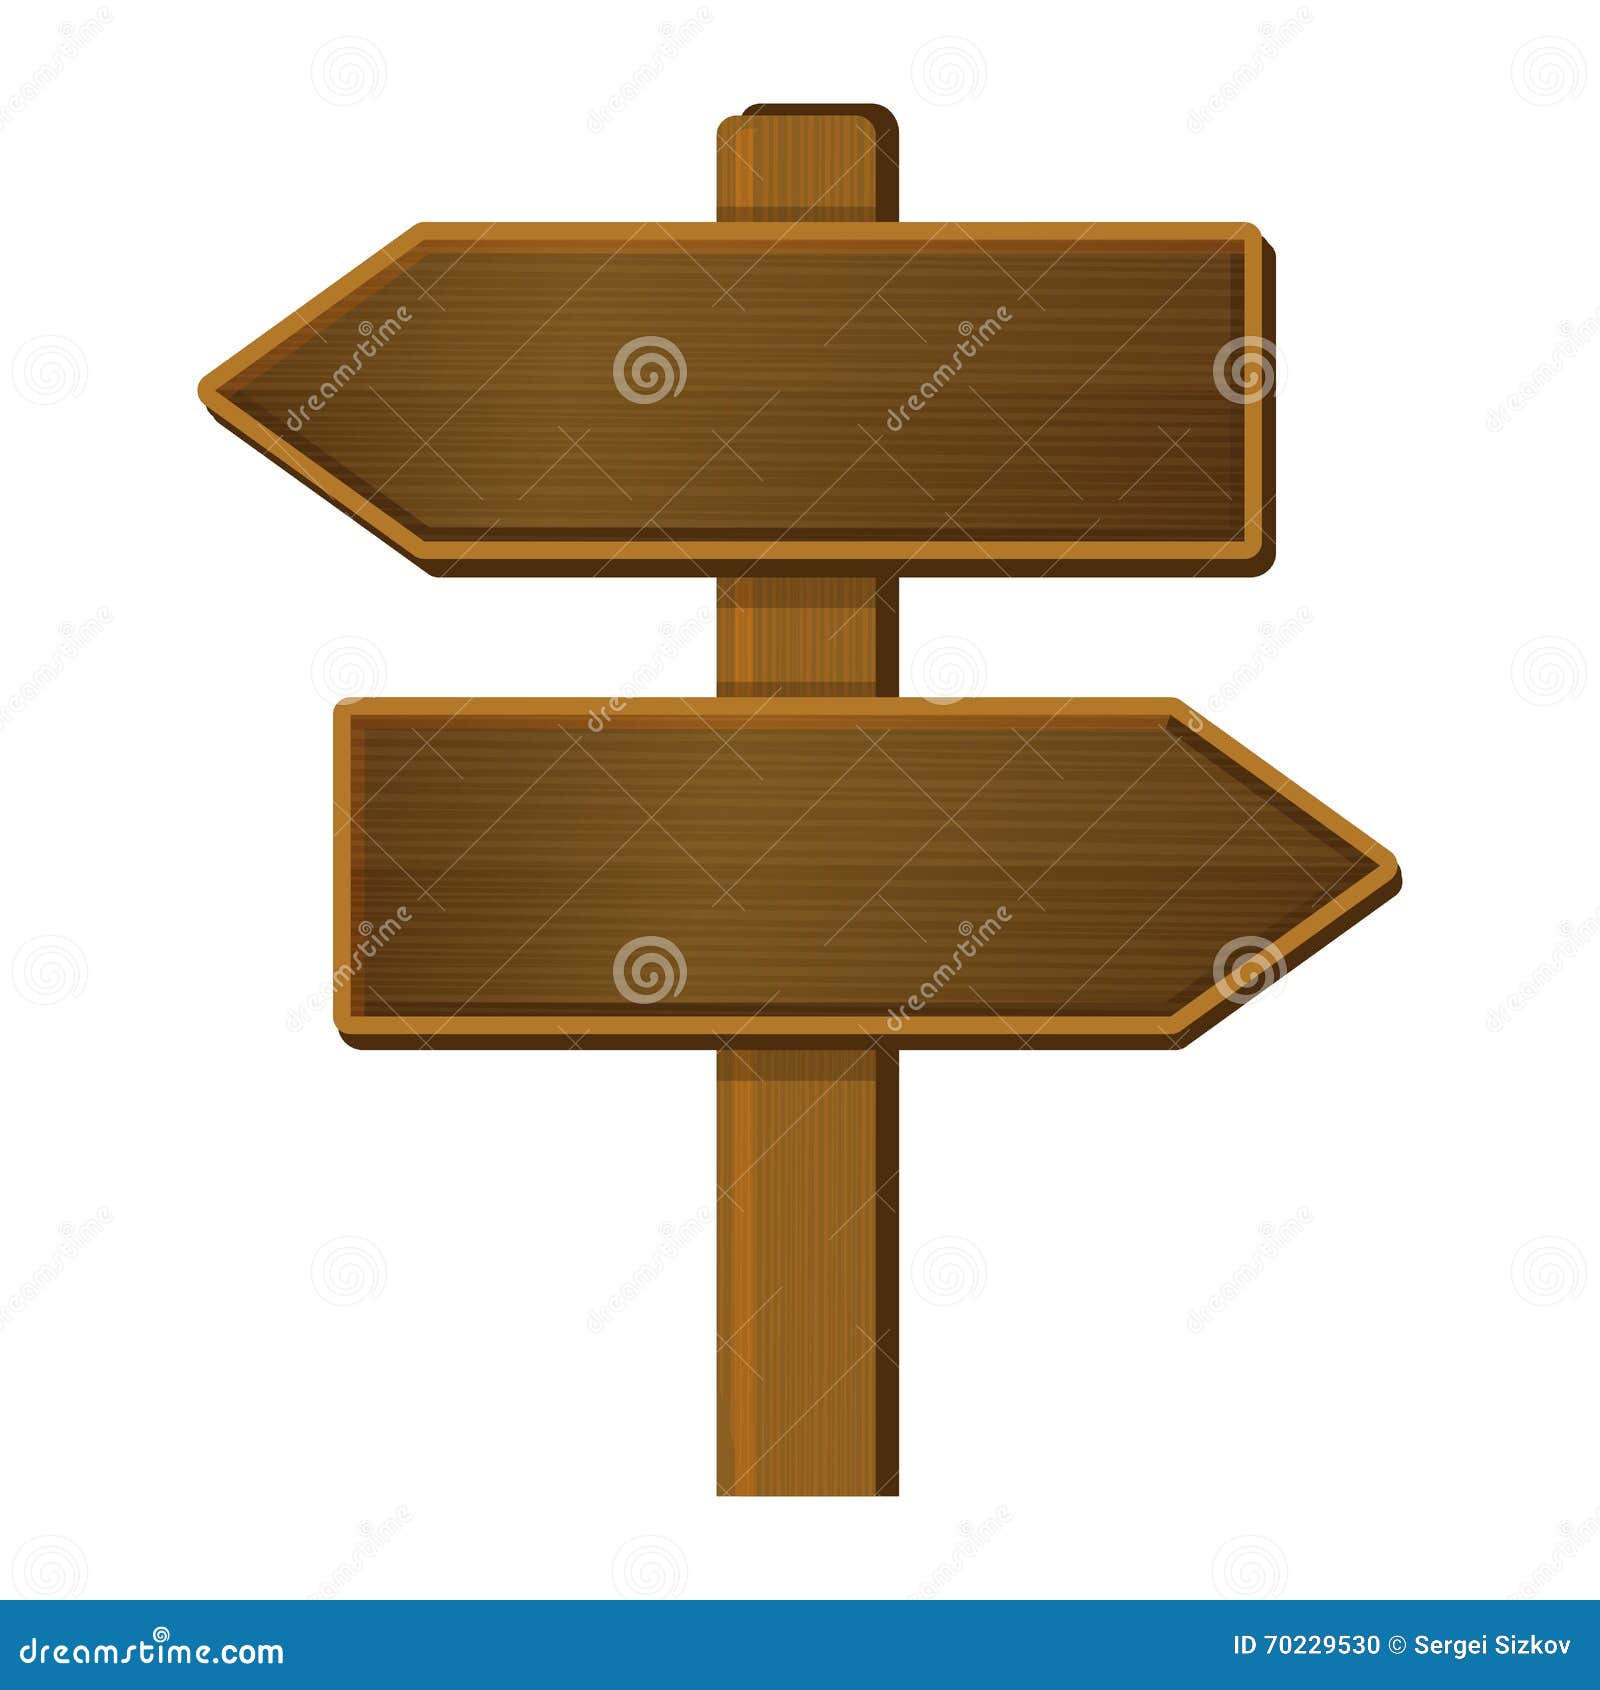 Wooden Arrow Sign. Signpost on White Background